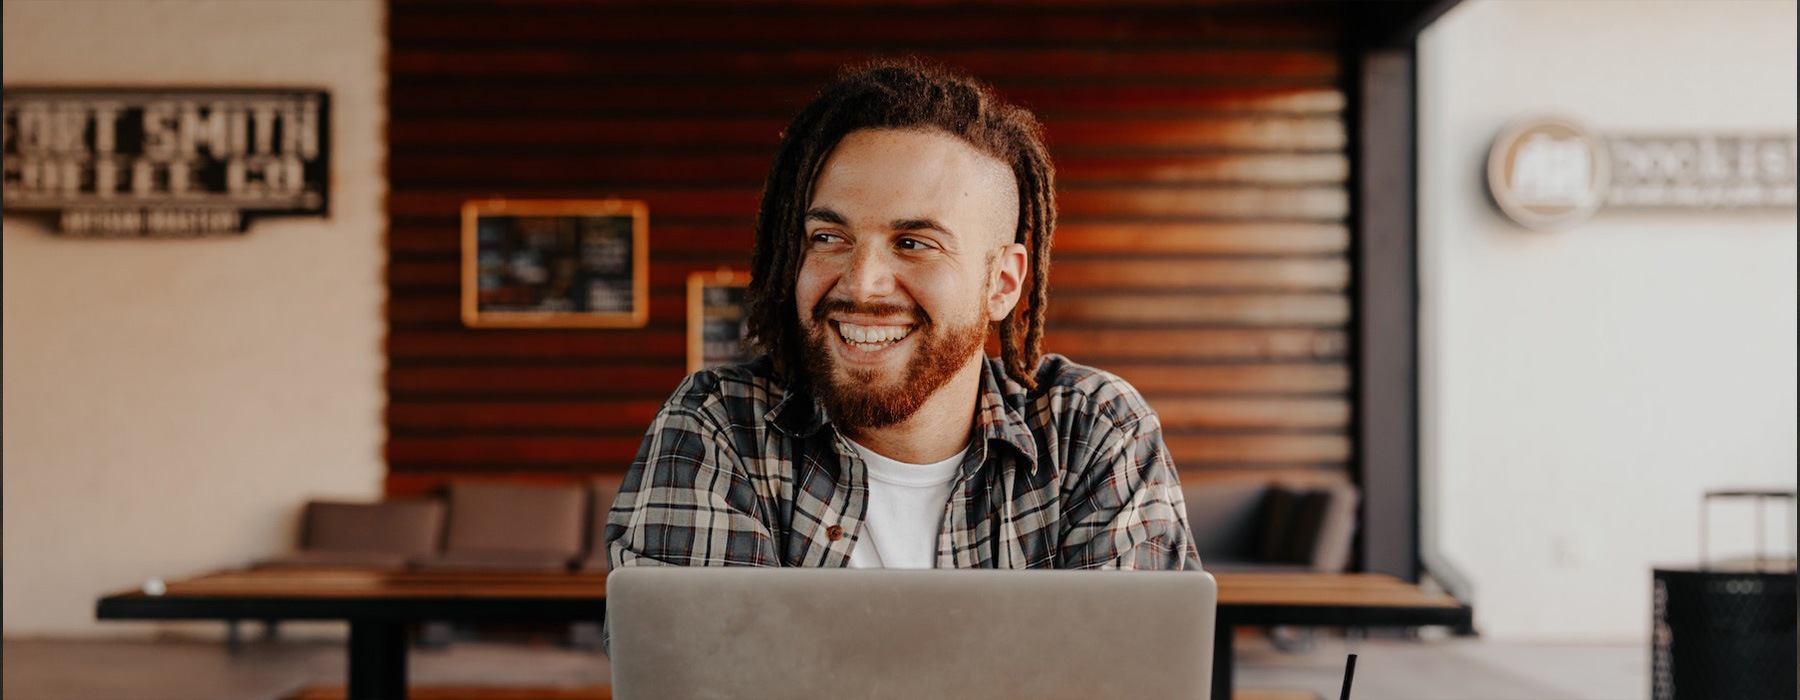 lifestyle image of a man smiling in a warm-toned room